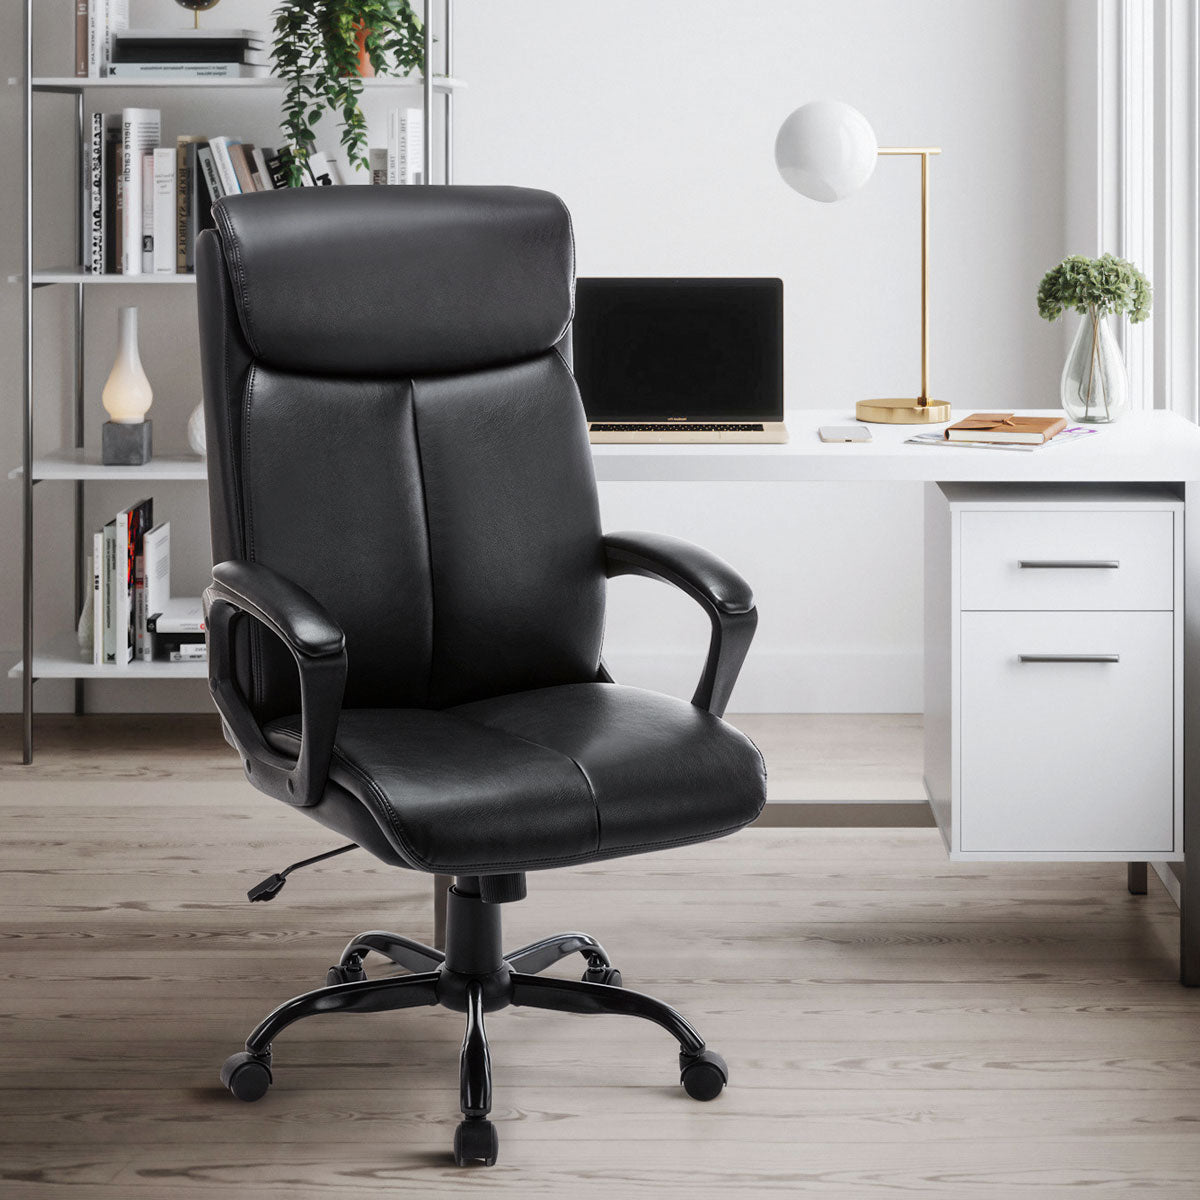 High Back Office Chair - Executive Bonded Leather Computer Desk Swivel Task Chair W/Rocking Function, Black